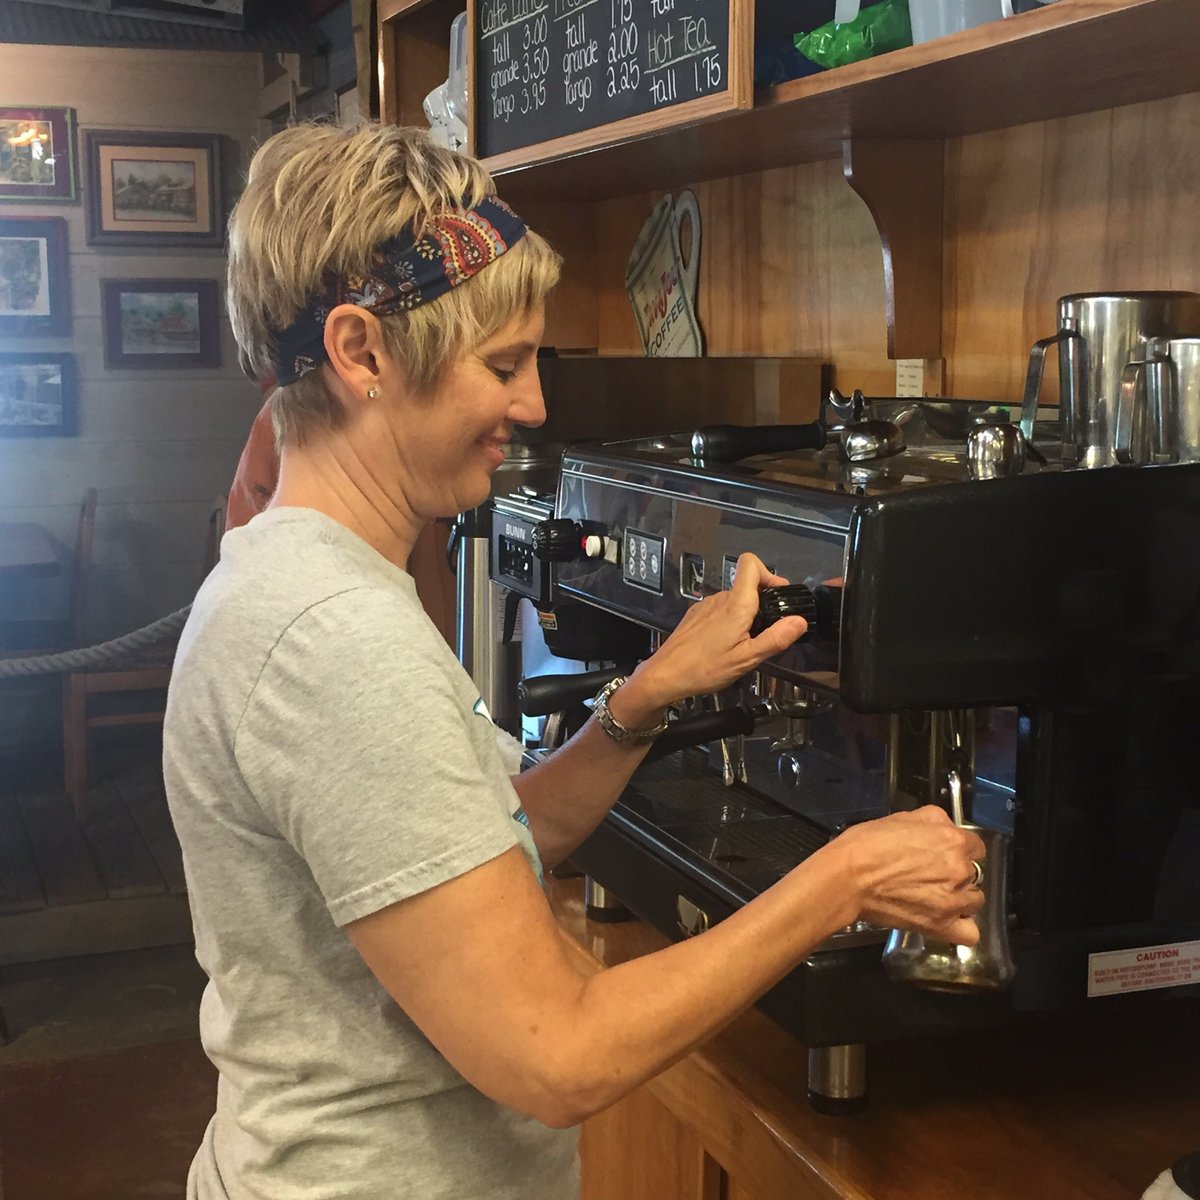 Good morning Catawba! Time for some Morning Coffee, Espresso, Cappuccino... whatever sounds good to you! #catawbaisland